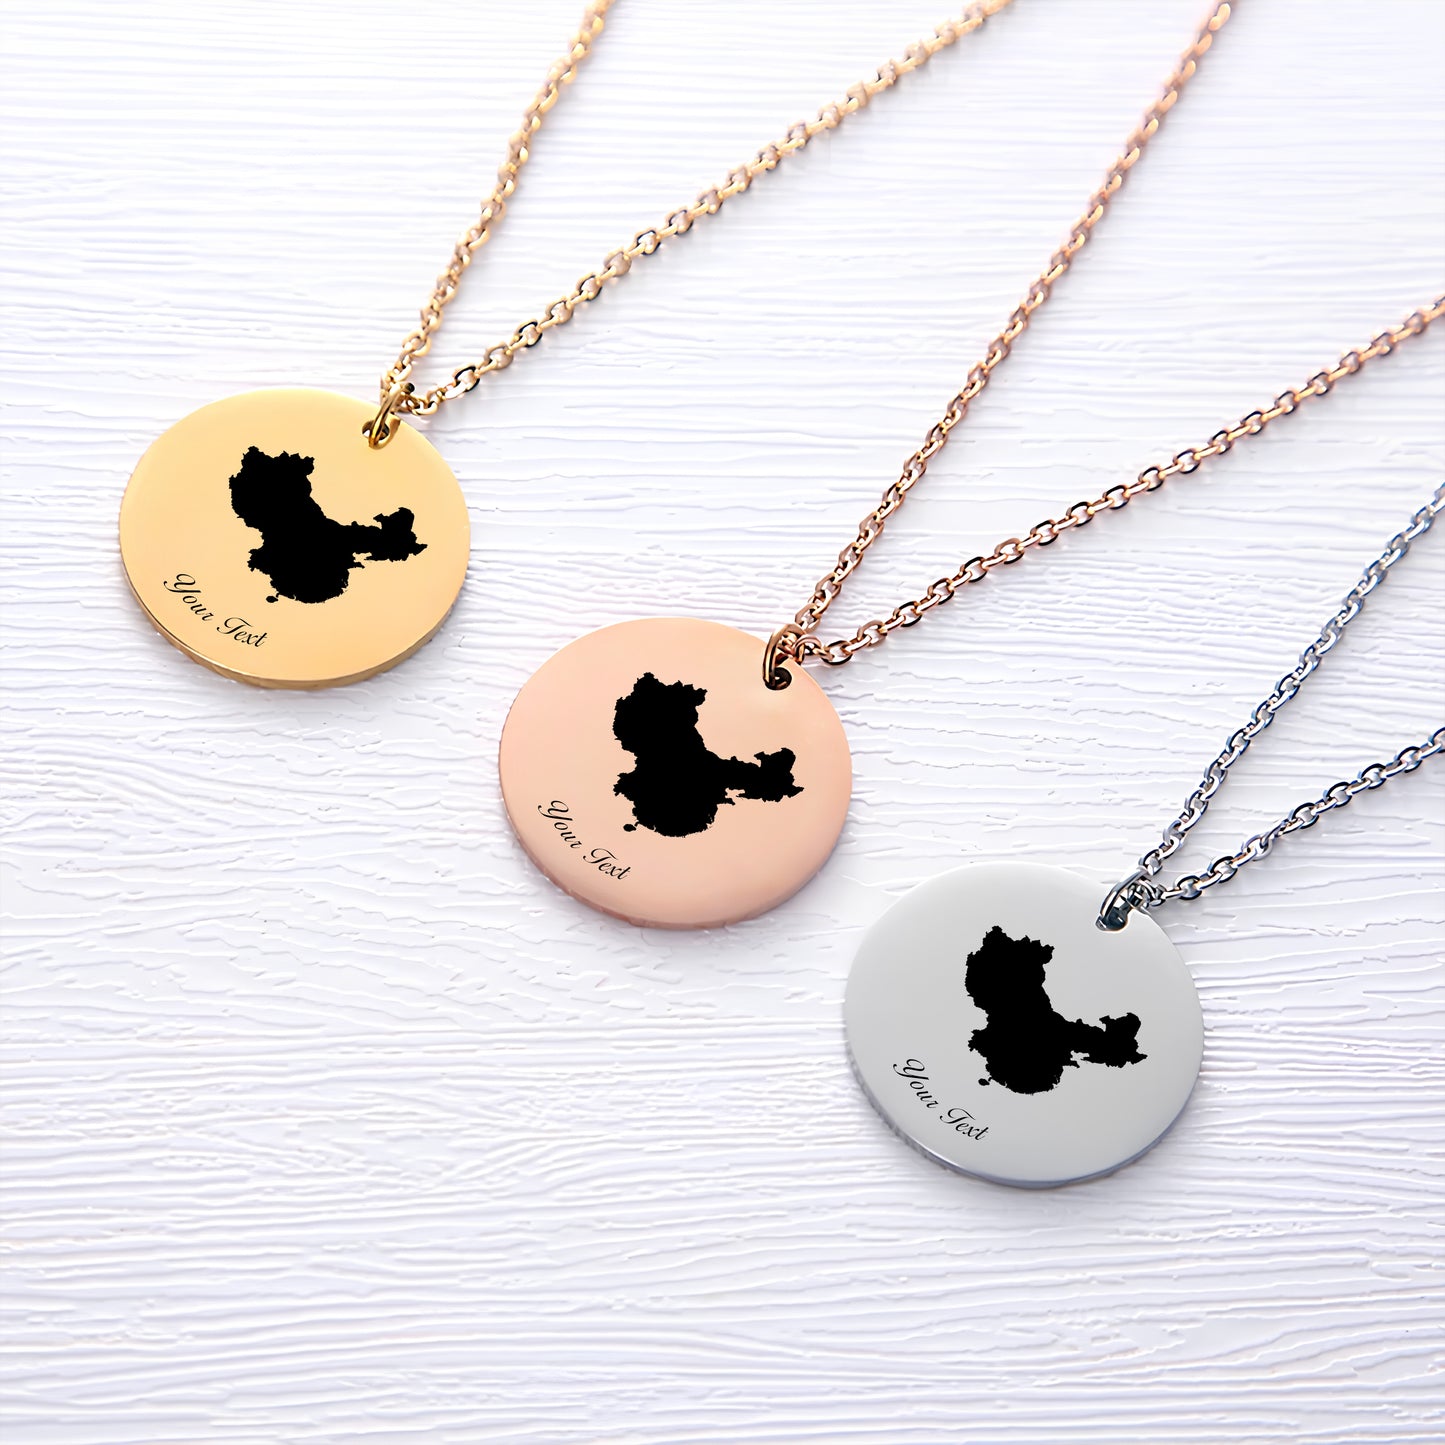 China Country Map Necklace - Personalizable Jewelry